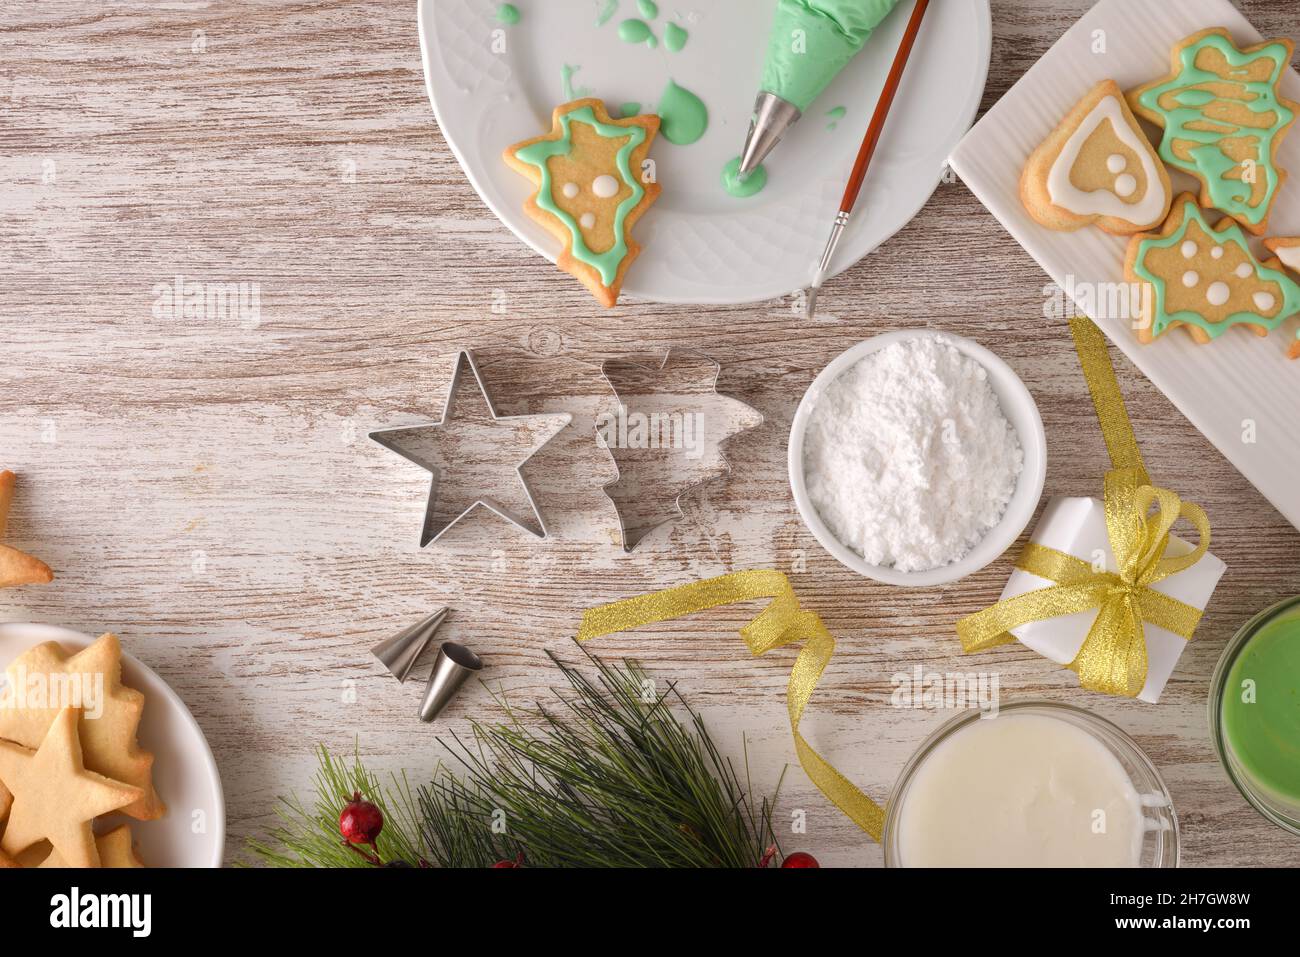 Tools for painting Christmas cookies with icing close up. Top view. Horizontal composition. Stock Photo